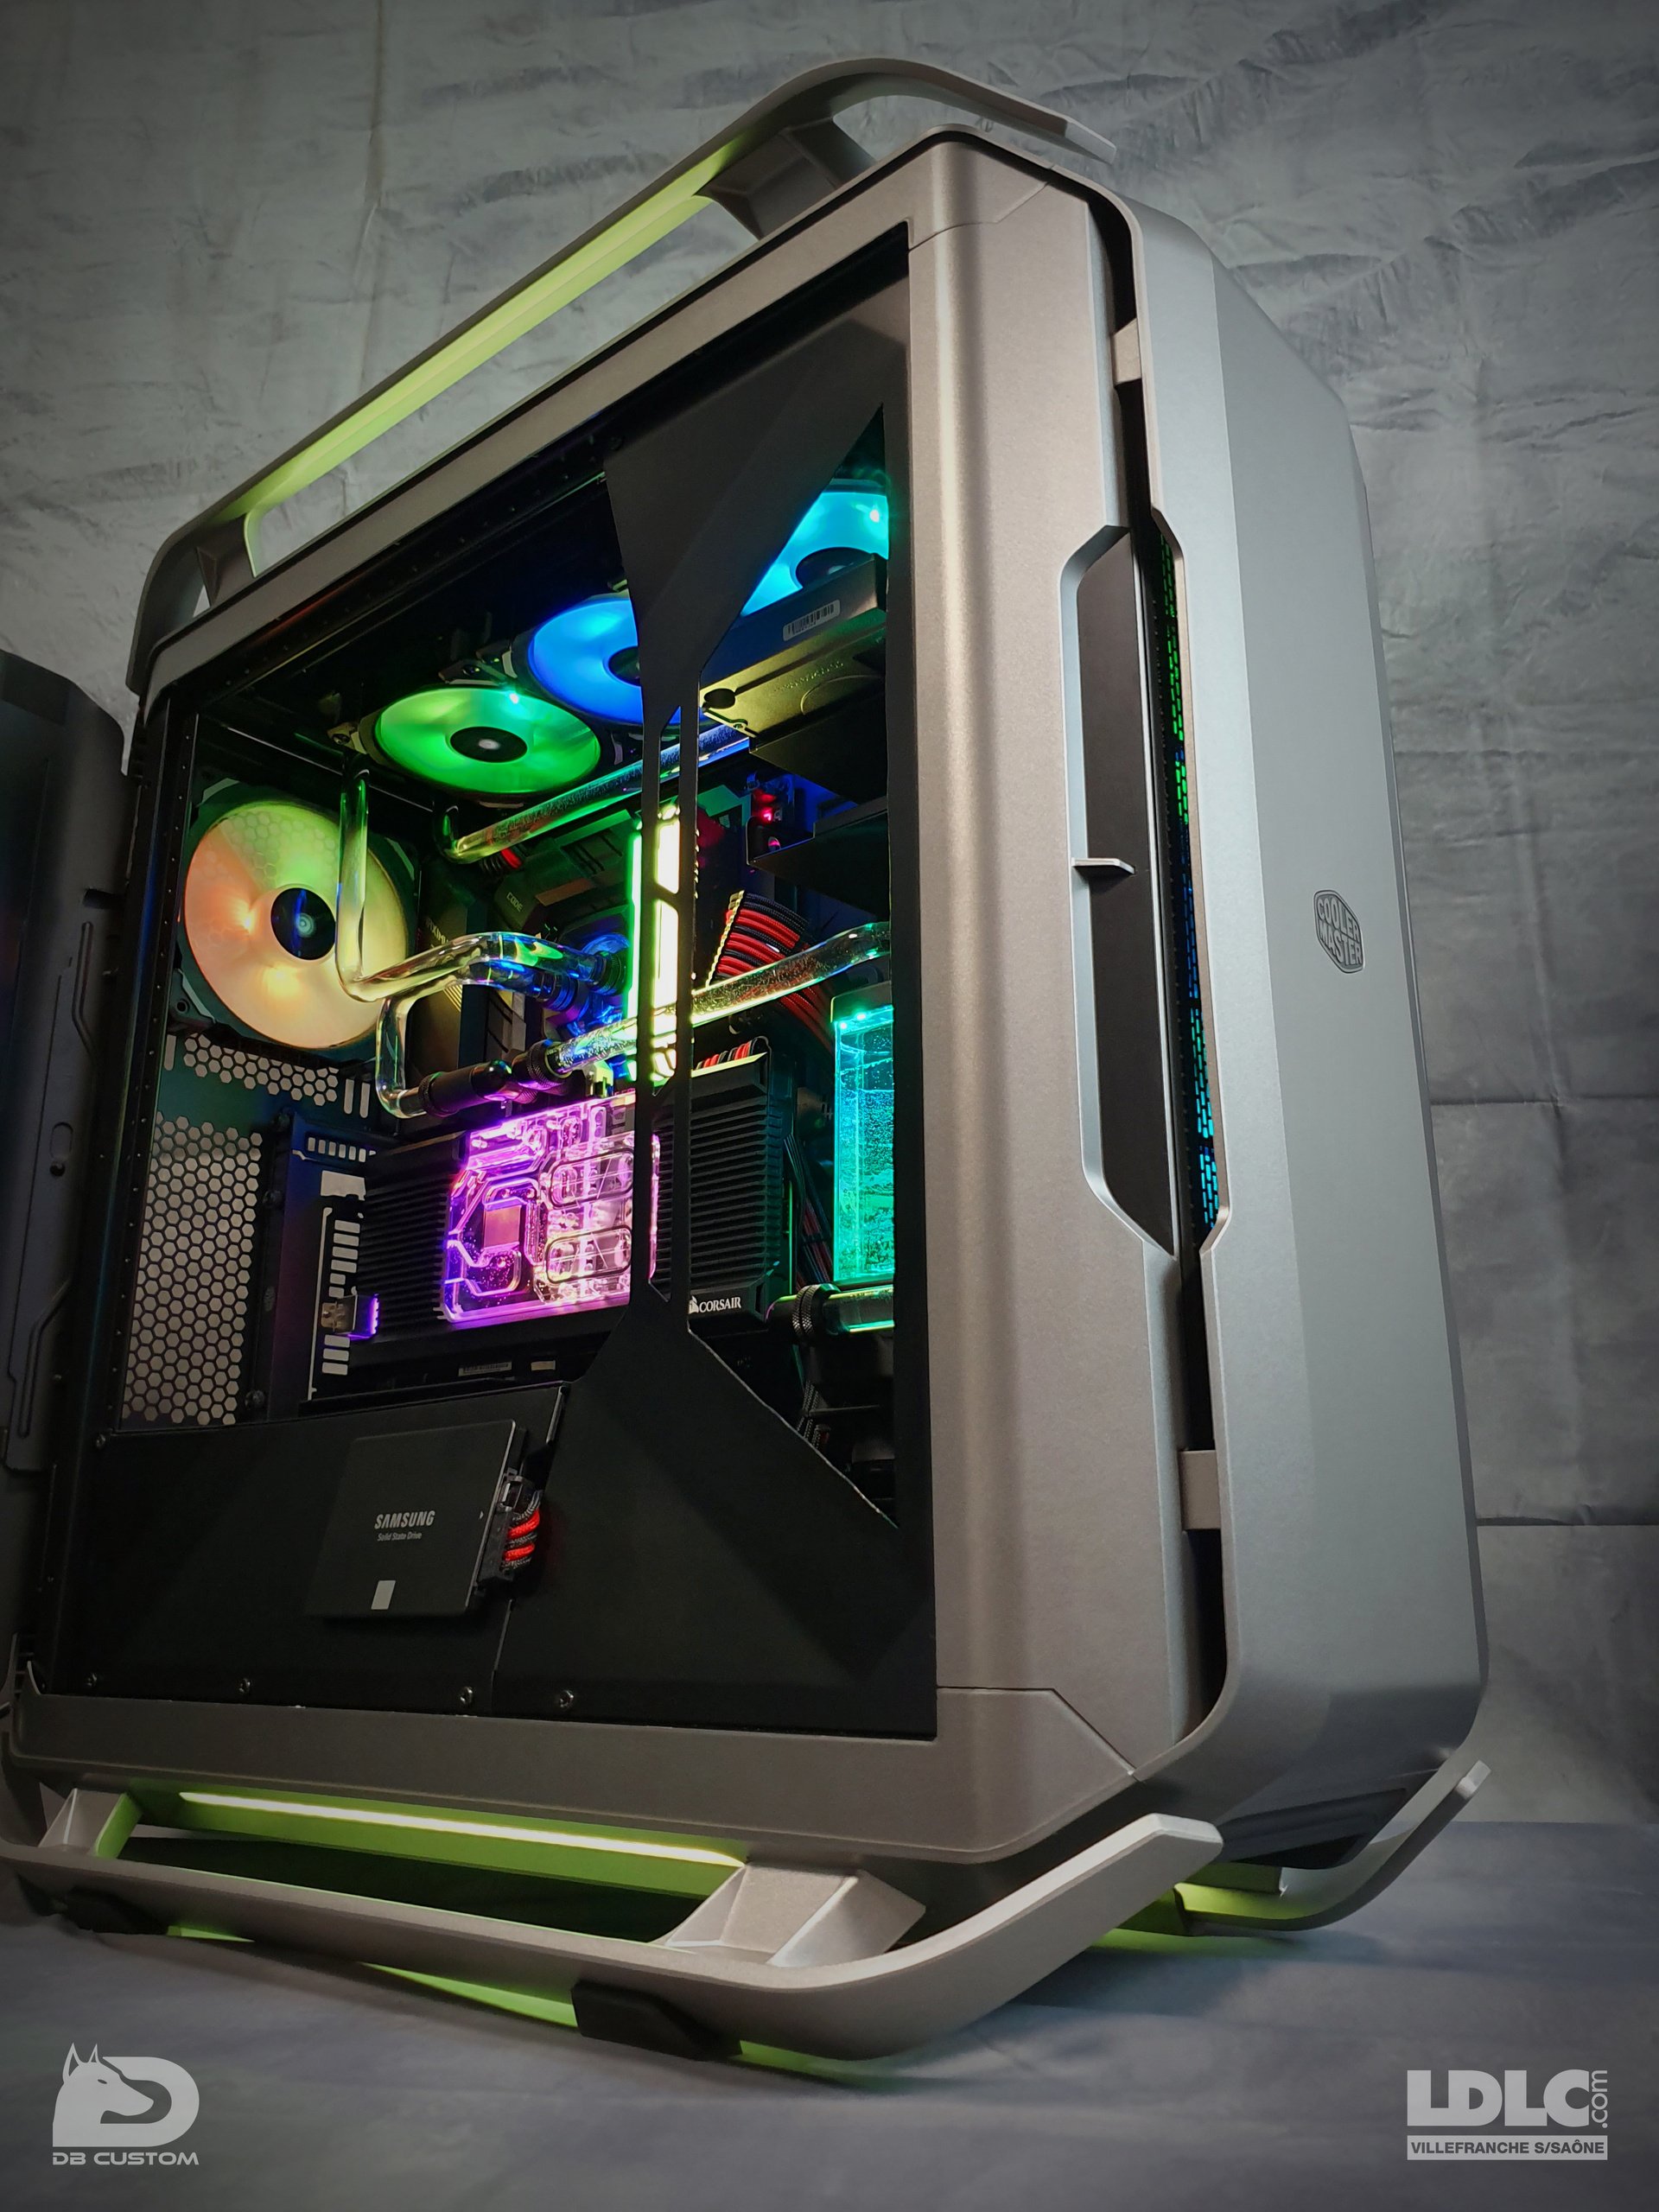 Cooler Master Cosmo C700P / Corsair Hydro X Series » builds.gg